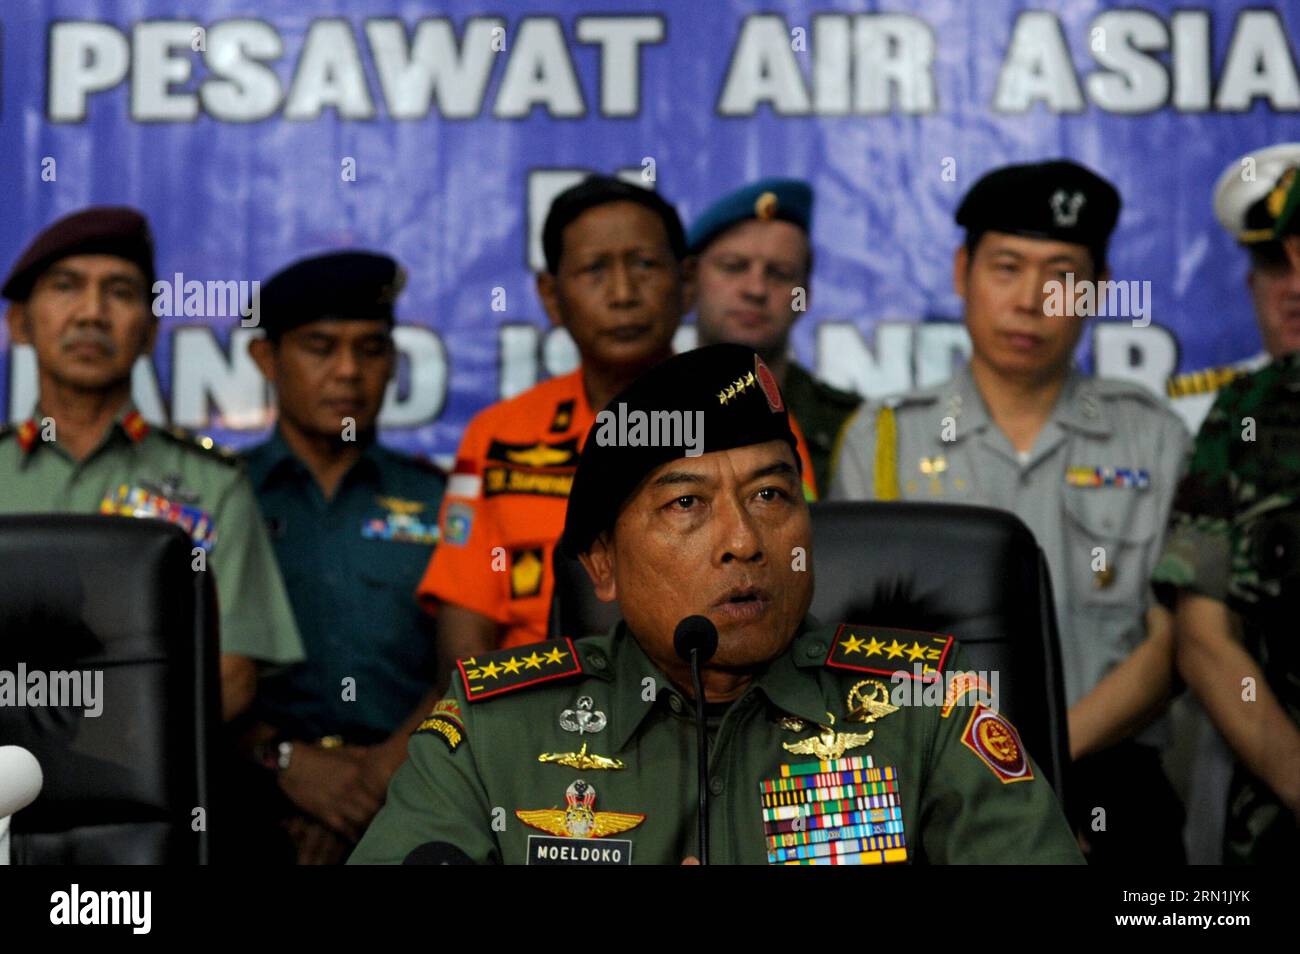 (150106) -- PANGKALAN BUN, Jan. 6, 2015 -- Indonesian Military Commander General Moeldoko (front) speaks during a press conference after joining in the search of Airasia QZ 8501 victims in Pangkalan Bun, Indonesia, Jan. 6, 2015. The search operation for AirAsia Flight QZ8501 will spread slightly eastward on Tuesday as the weather and currents drag wreckage in that direction, the head of Indonesia s rescue agency said. ) INDONESIA-PANGKALAN BUN-AIRASIA-PRESS CONFERENCE AgungxKuncahyaxB. PUBLICATIONxNOTxINxCHN   Pangkalan Bun Jan 6 2015 Indonesian Military Commander General  Front Speaks during Stock Photo